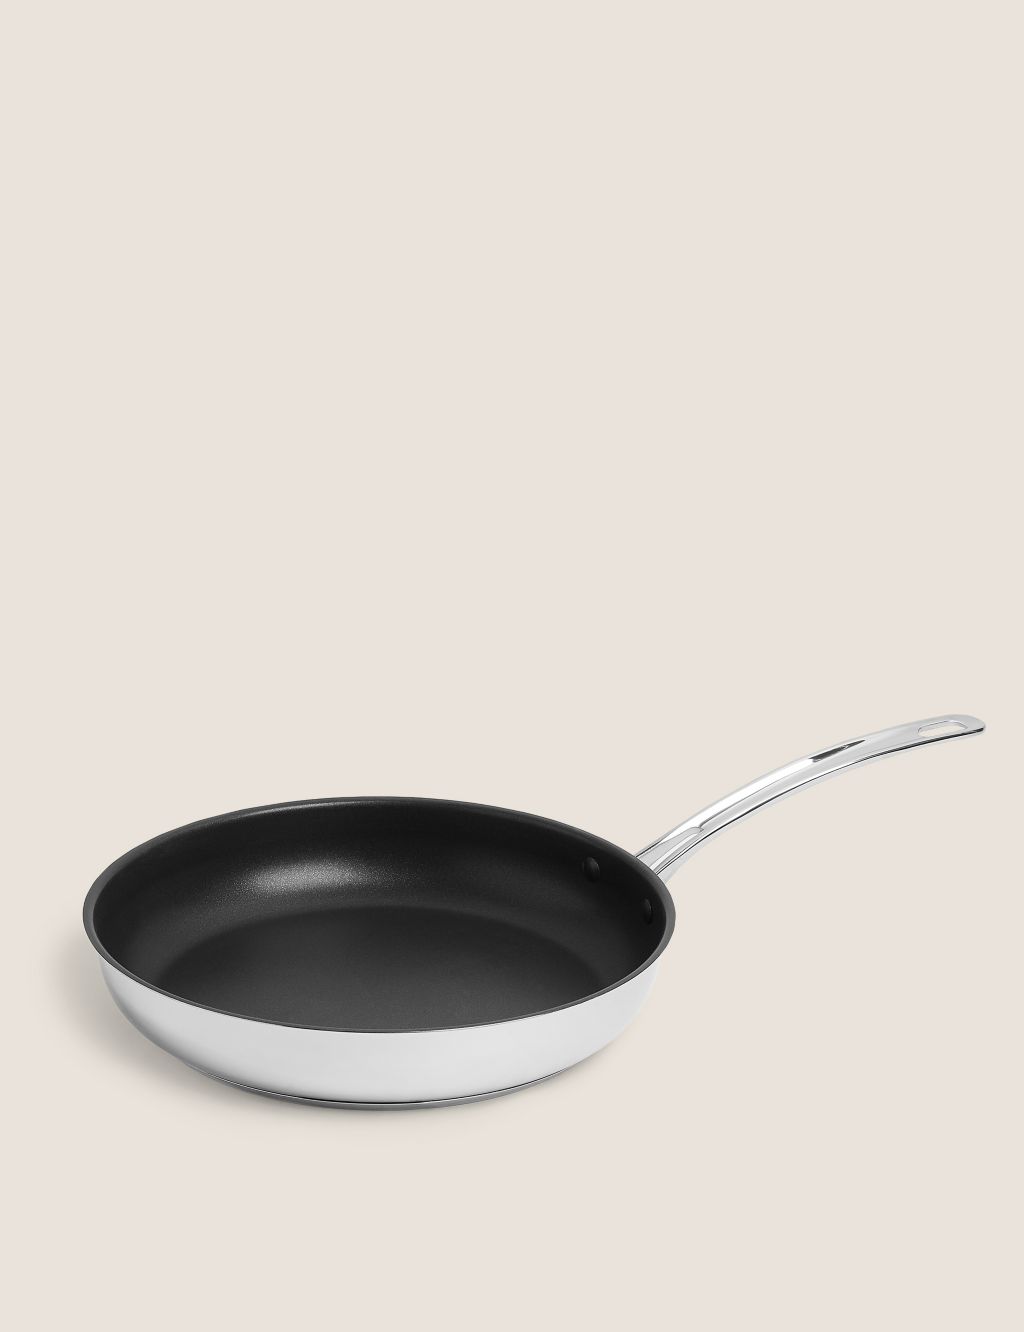 Stainless Steel 28cm Large Frying Pan image 1